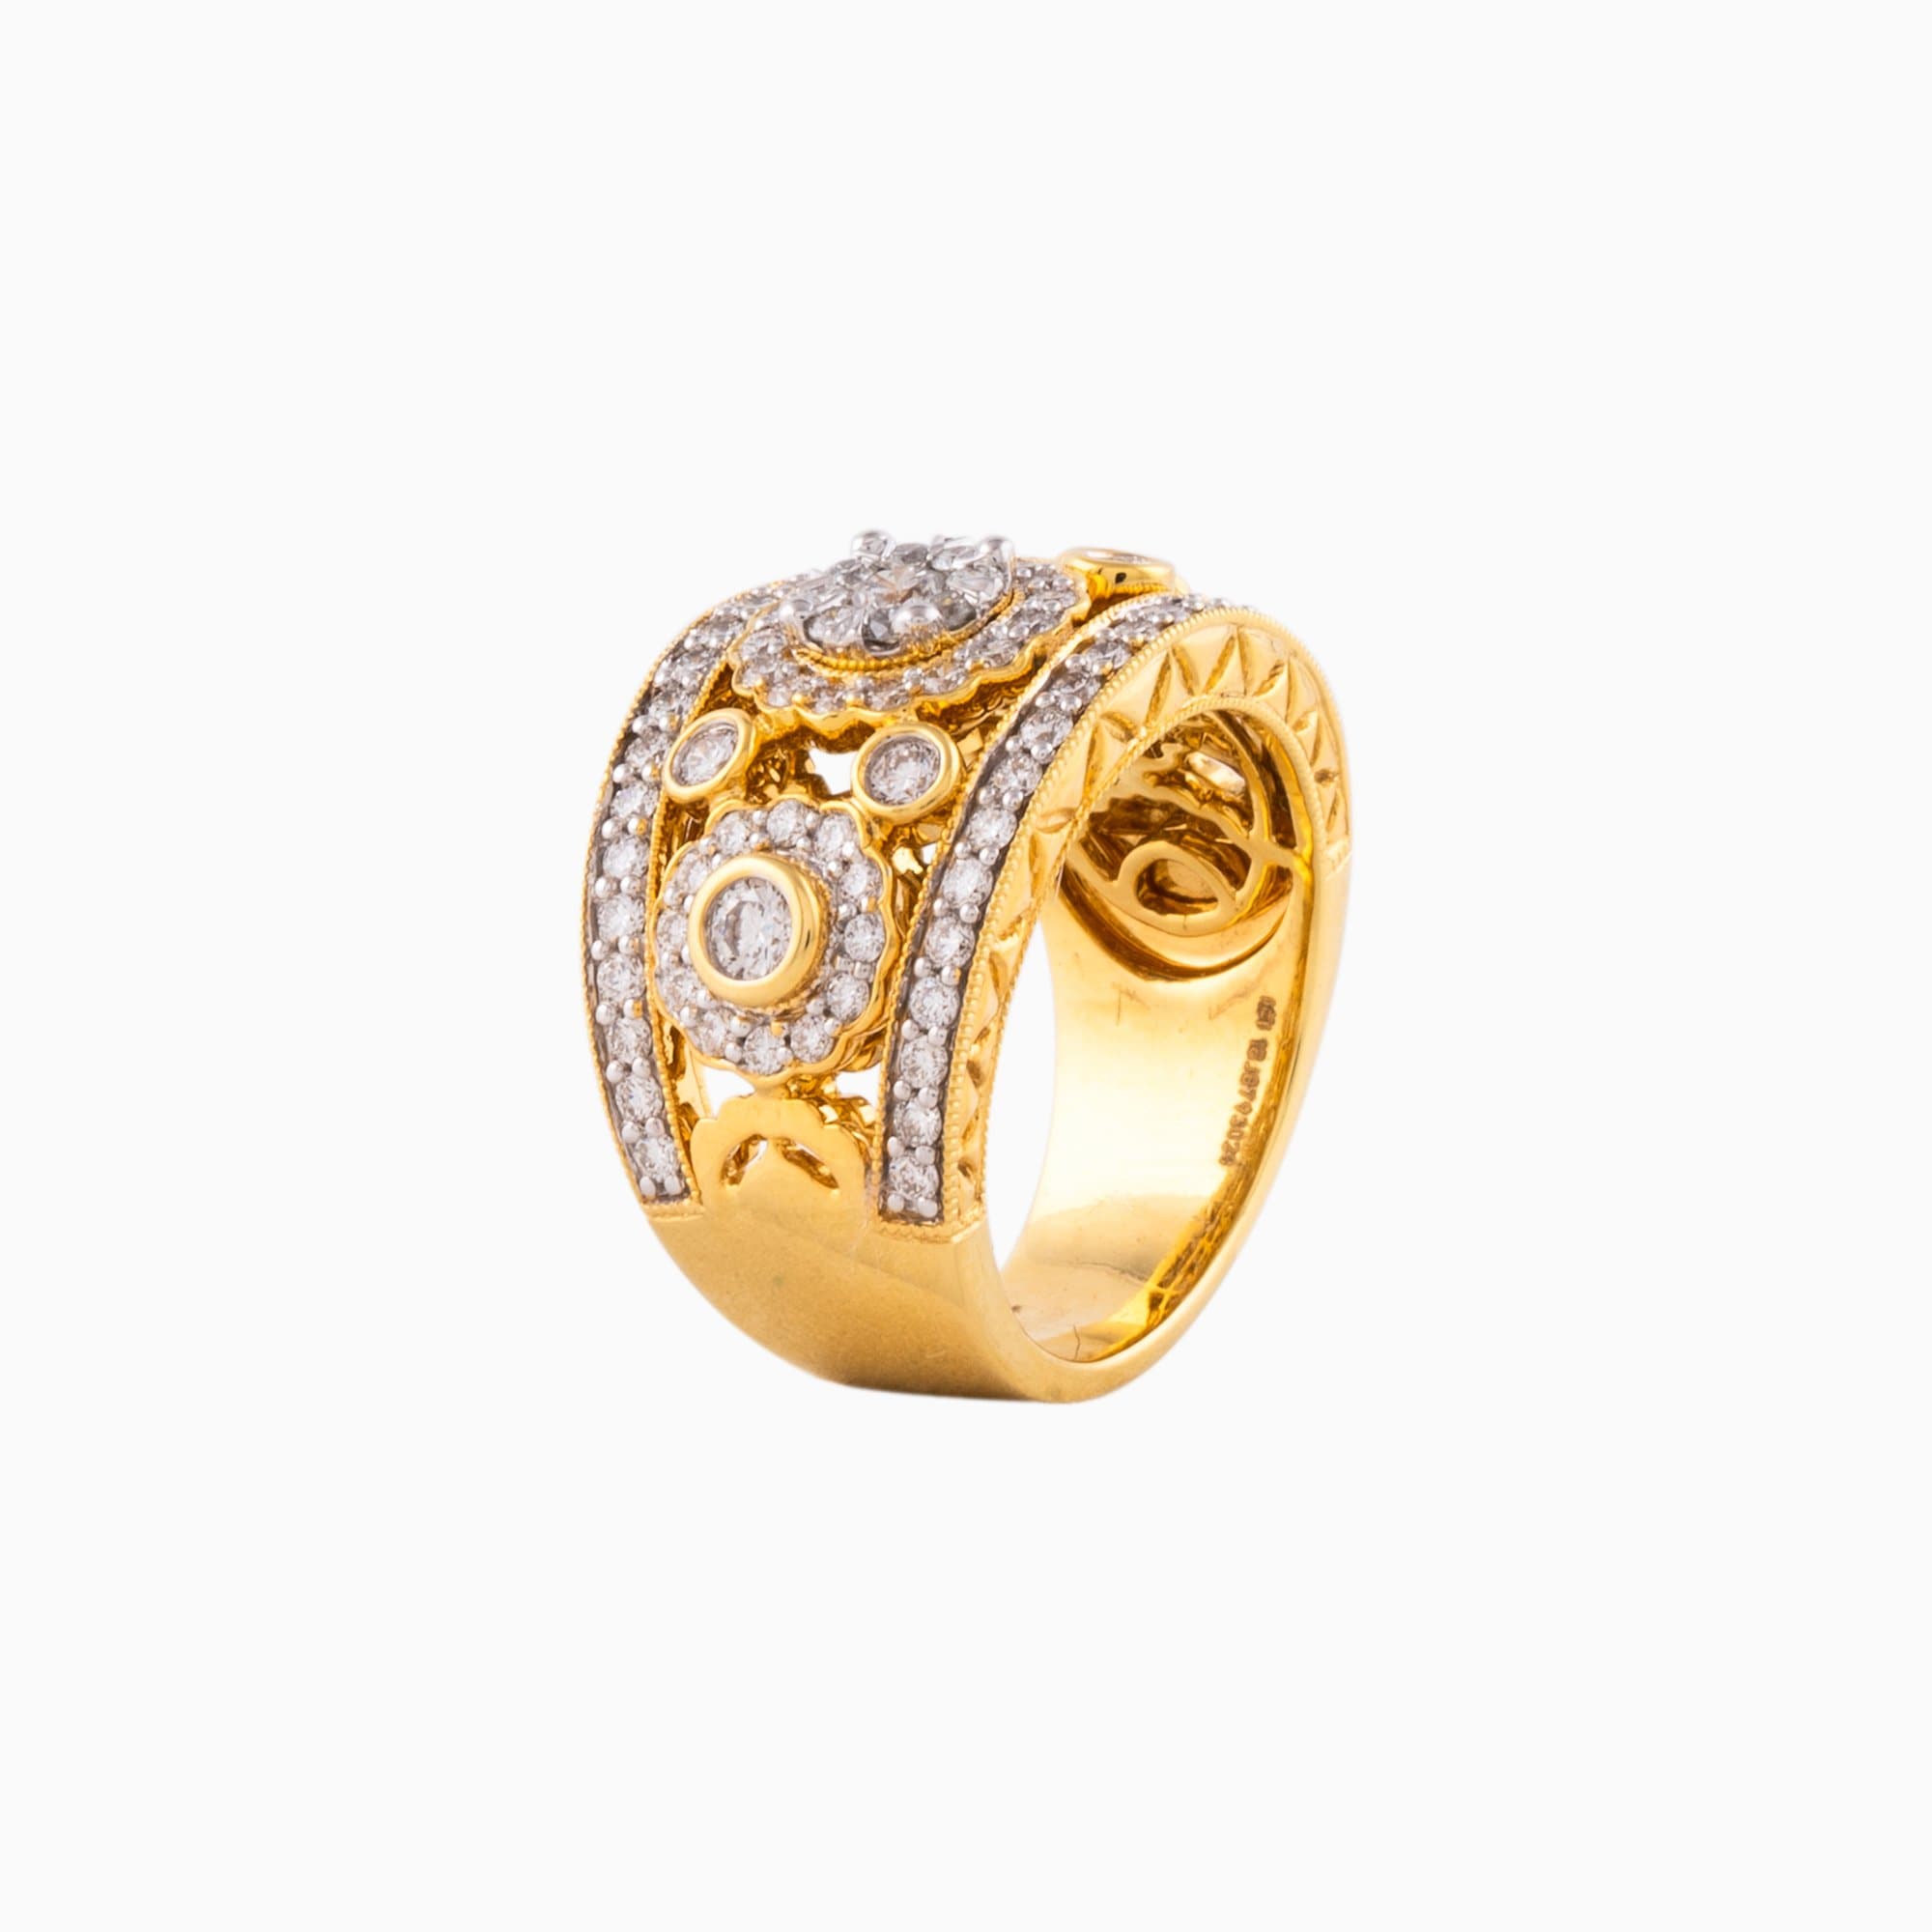 Ring with Round Cut Diamond - PGDR0301